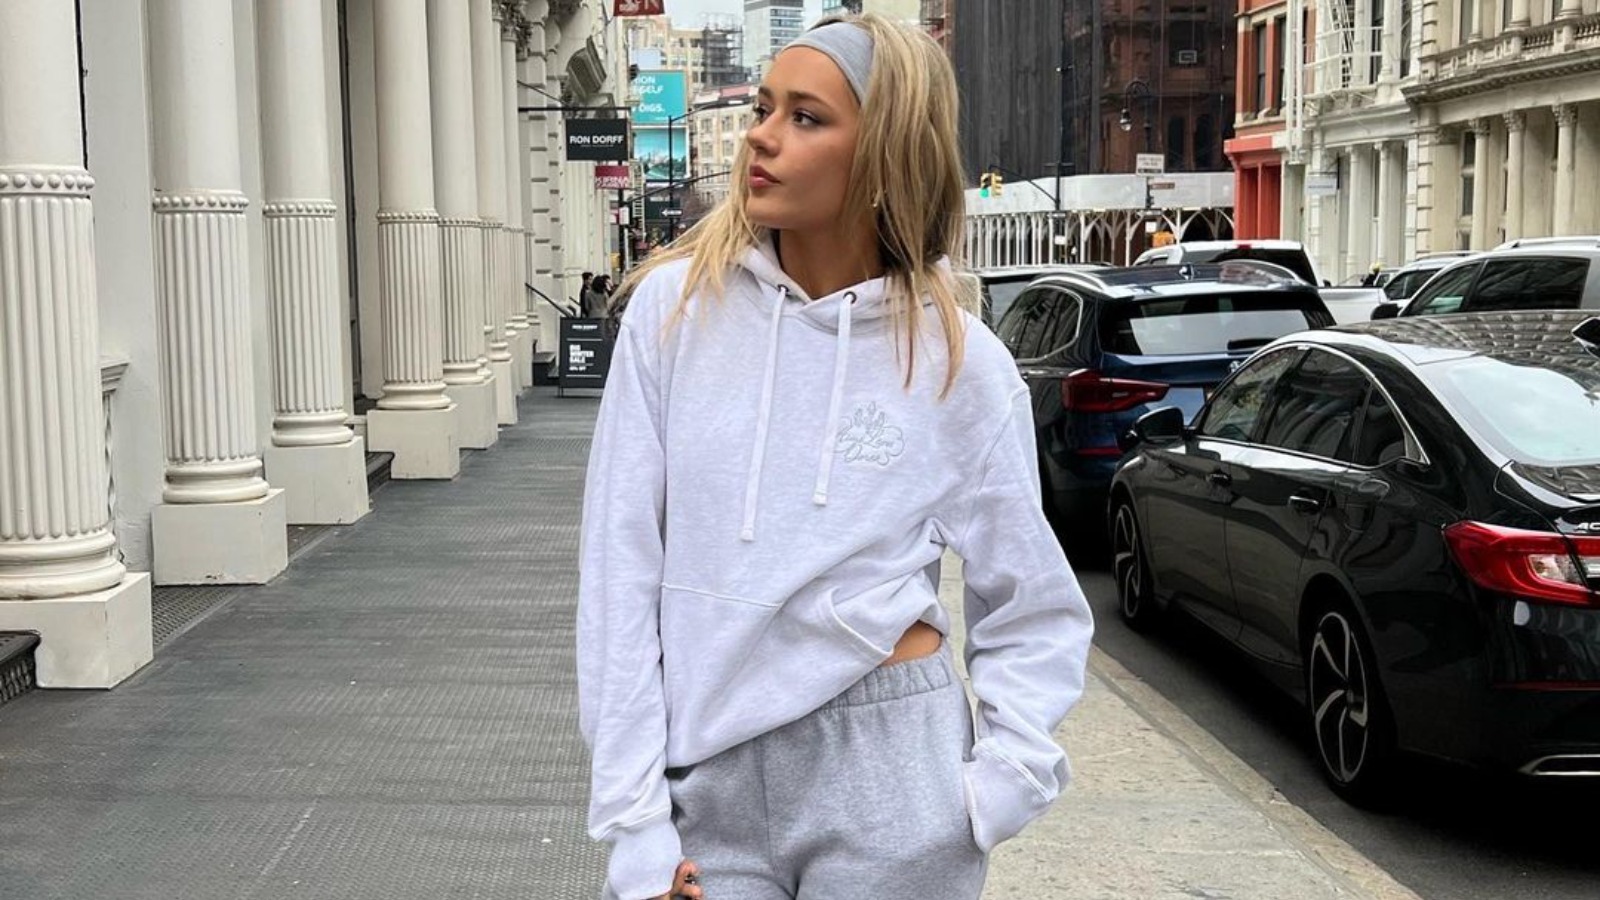 Is The Monochromatic Gray 'Groutfit' Making A Comeback?